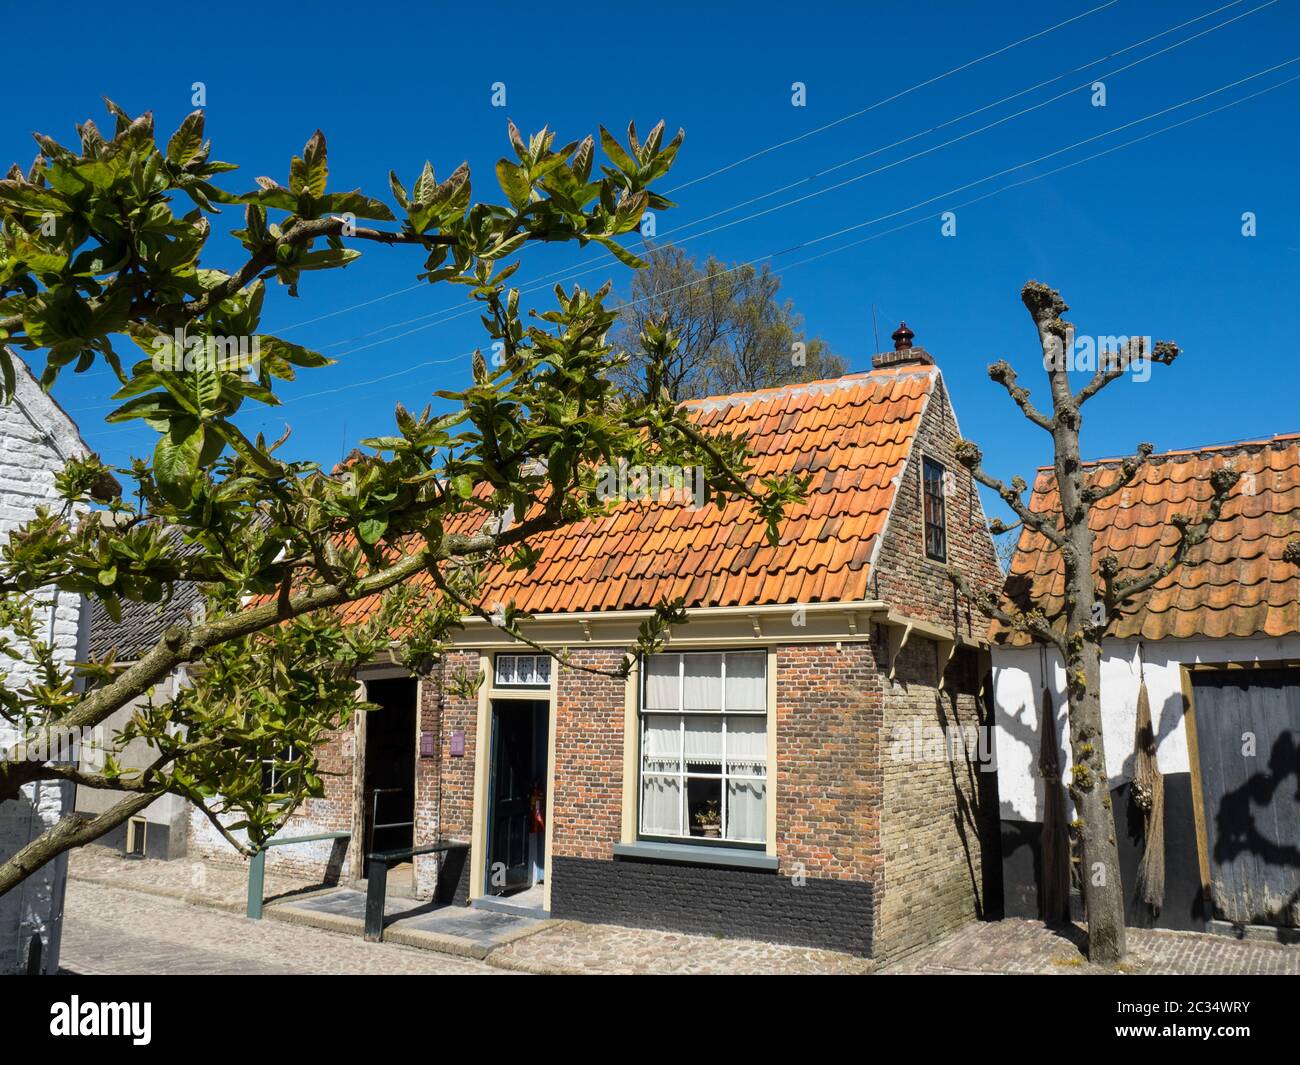 in the netherlands Stock Photo